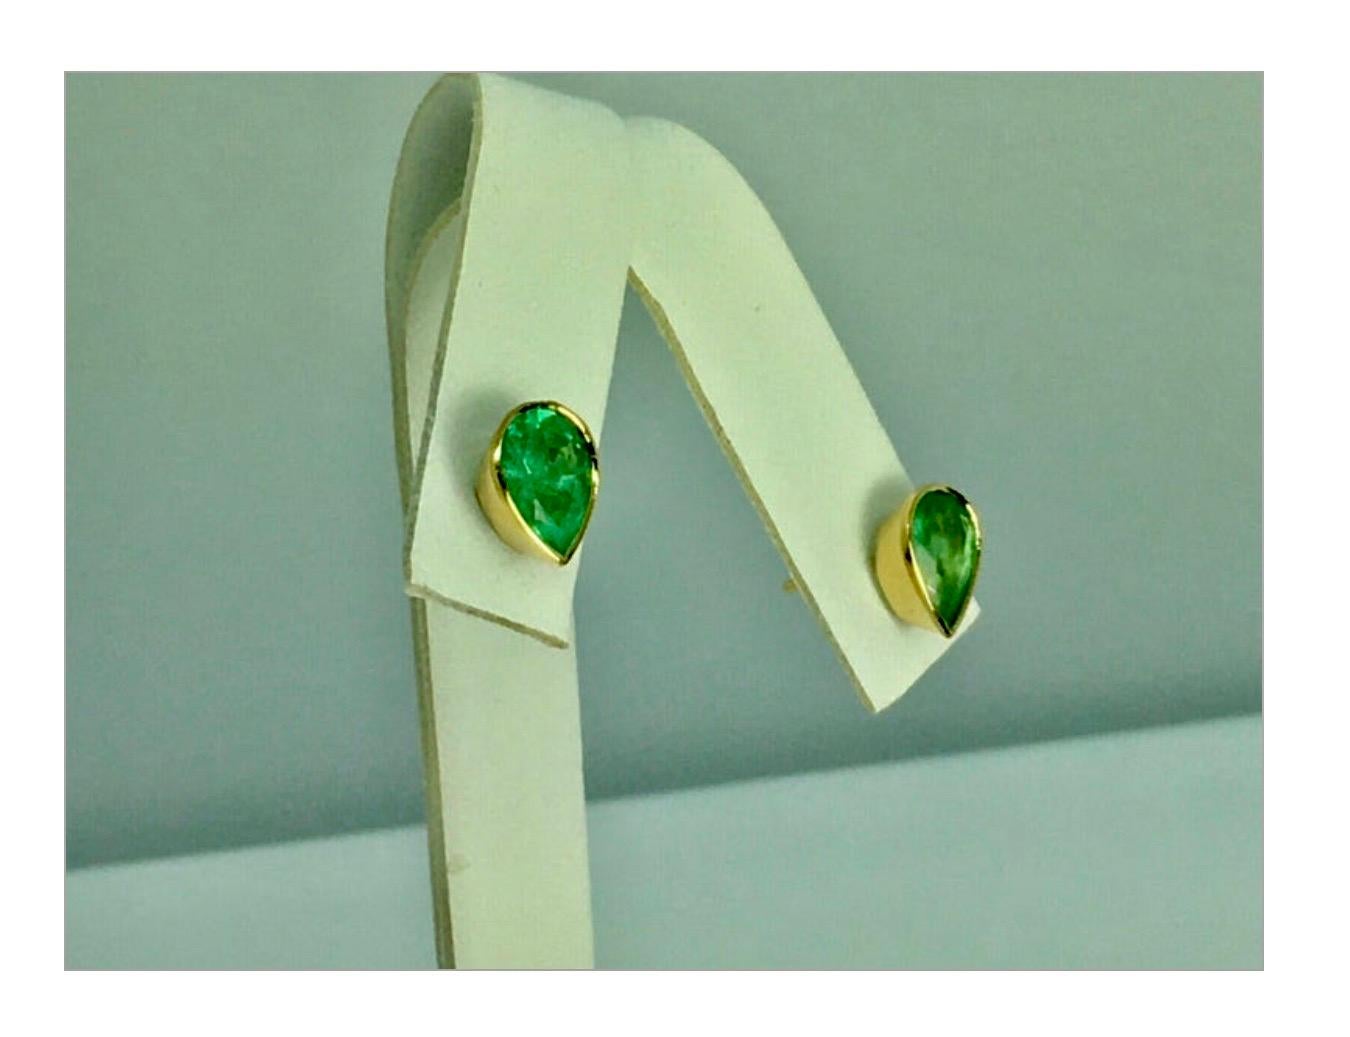 Colombian Emerald Solitaire Stud Earrings Pear Cut. Great for everyday wear!
Primary Stones: 100% Natural Colombian Emeralds
Shape or Cut : Pear Cut
Average Color/Clarity : Fine Medium Green/ Clarity VS
Total Weight : 2.40 carats 
 Other Stone: